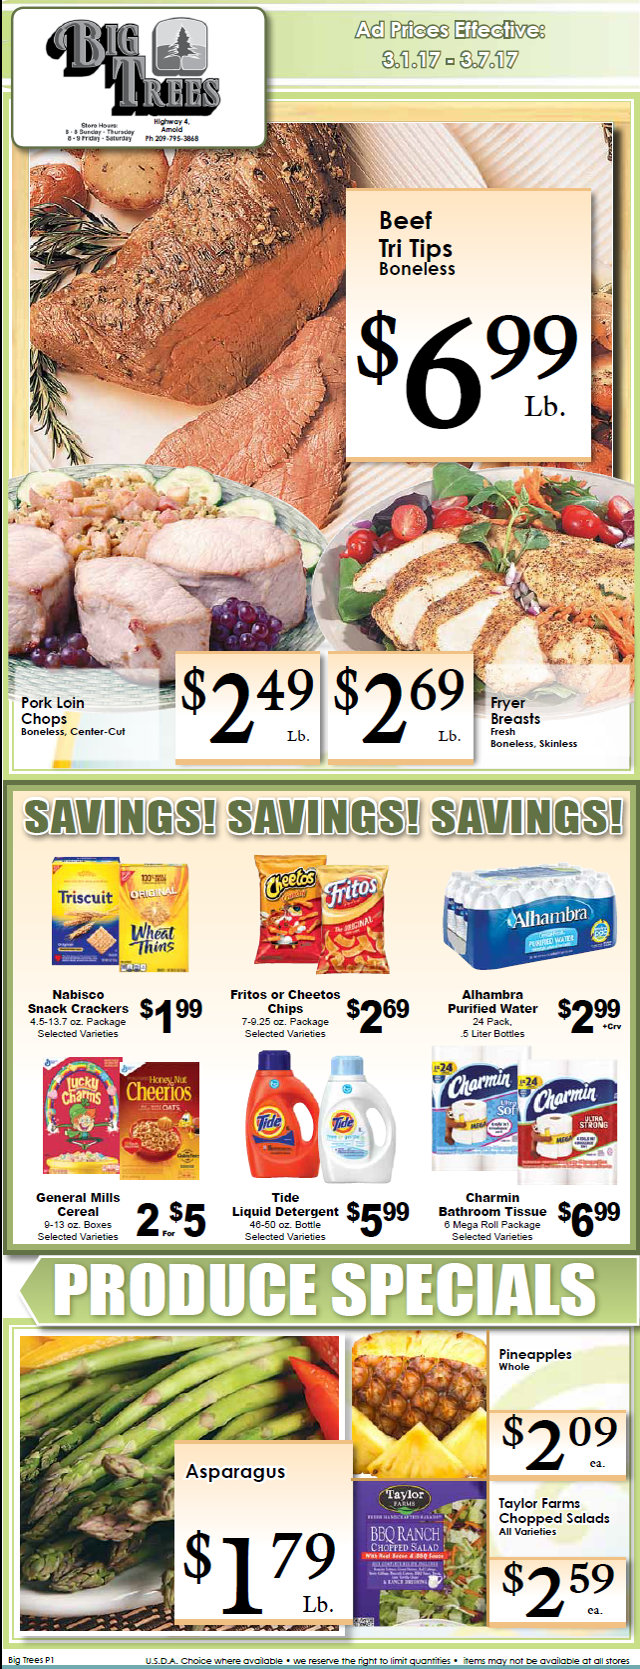 Big Trees Market Weekly Specials & Grocery Ad Through March 7th